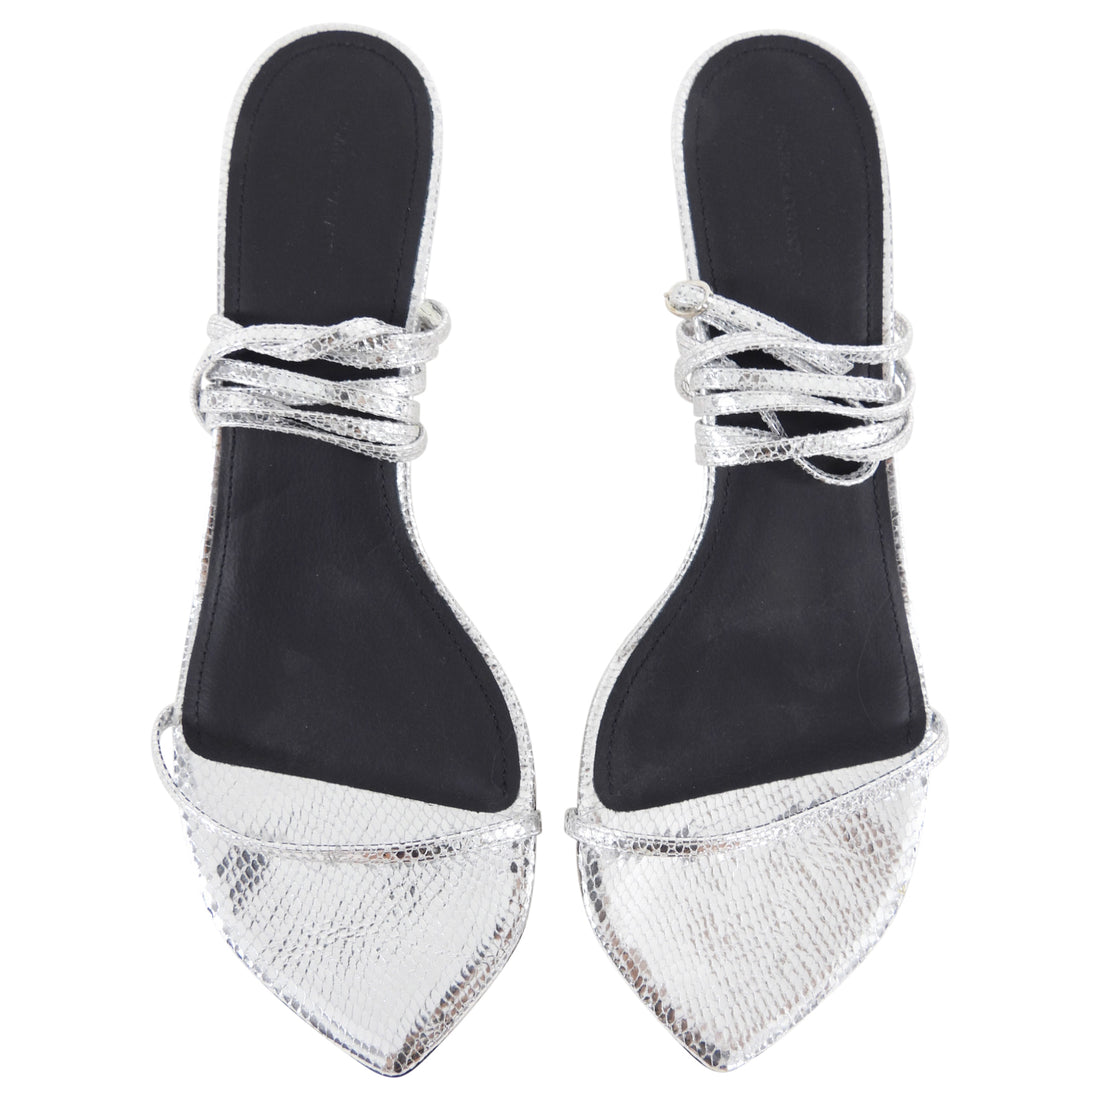 Isabel Marant Silver Metallic Leather Strappy Sandals - 40